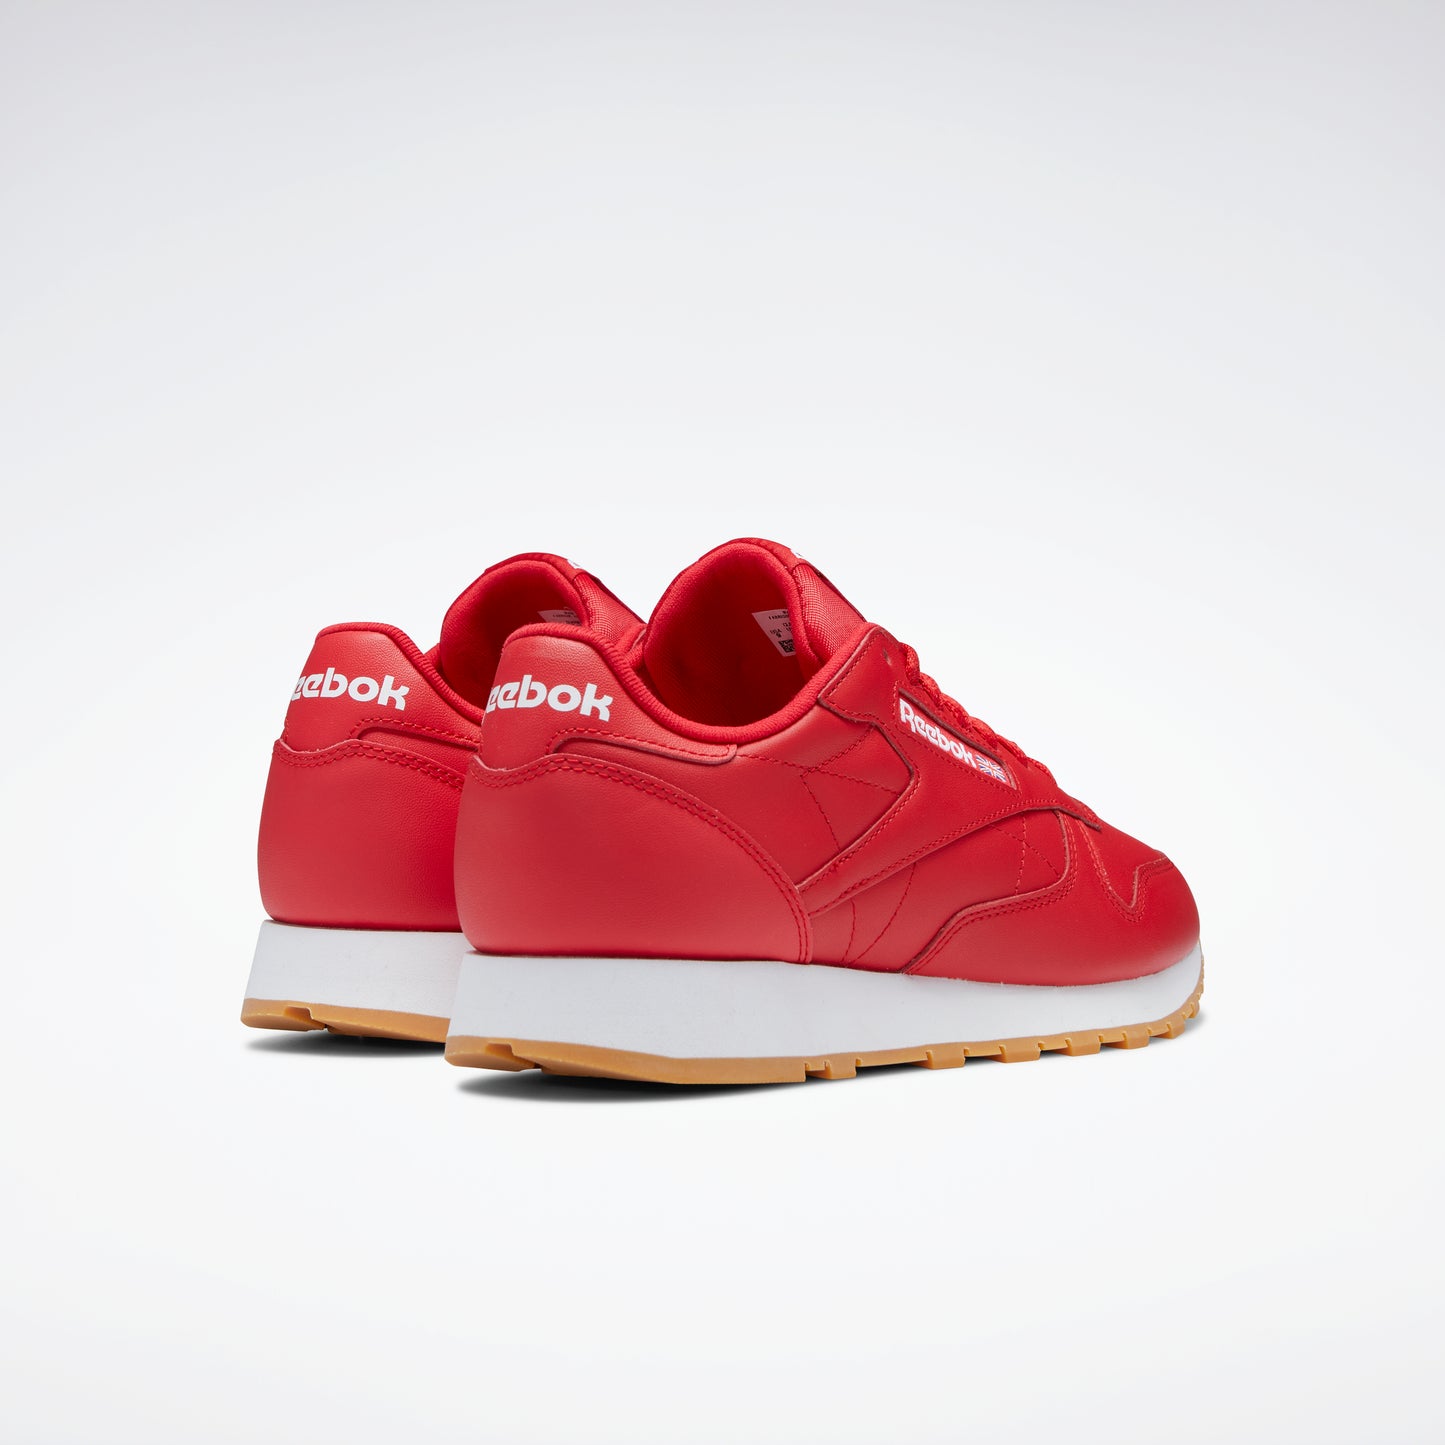 Classic Leather Shoes Vector Red/White